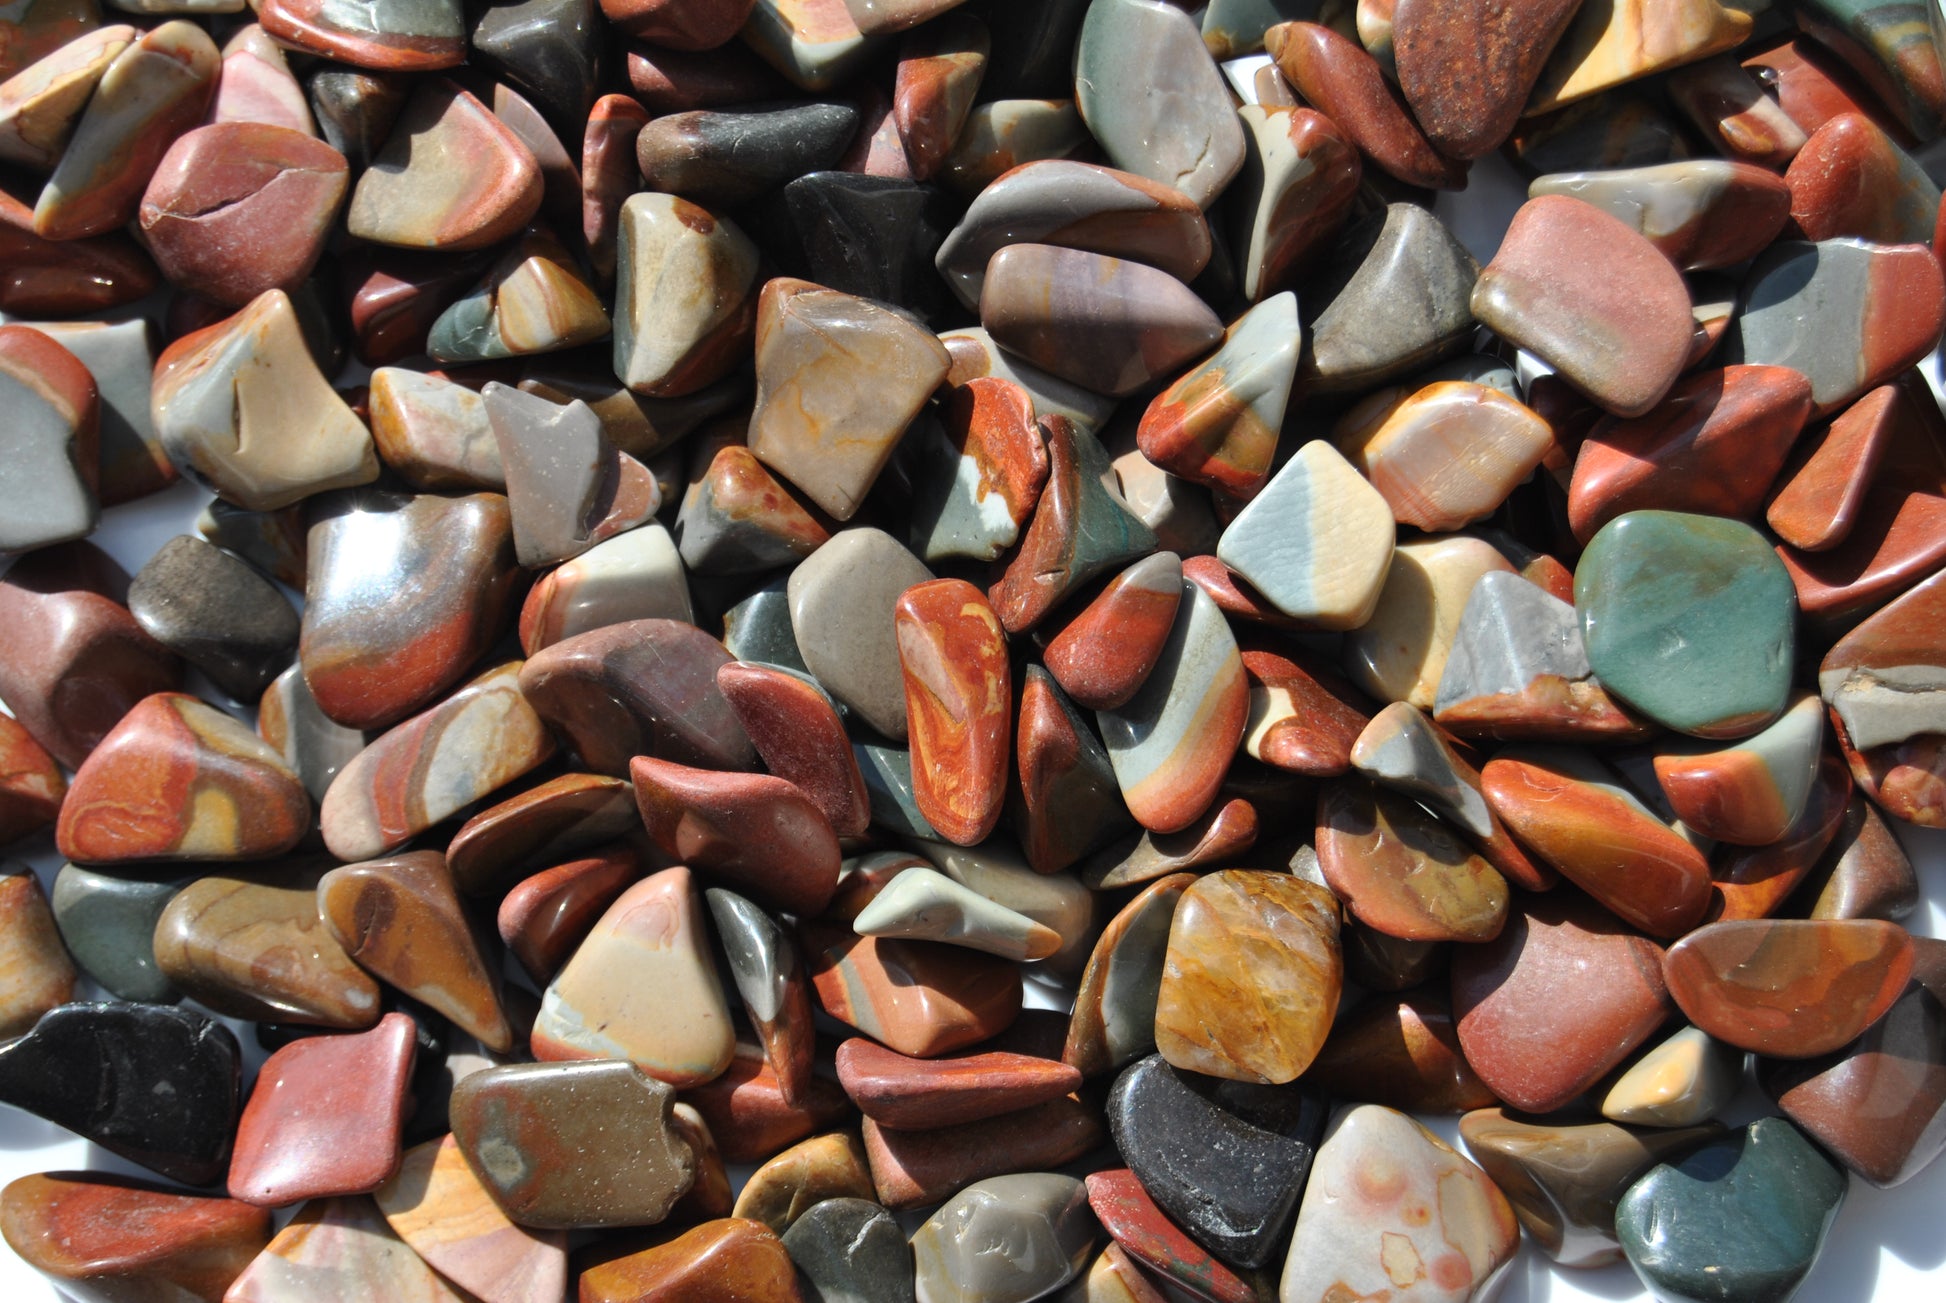 A top view of an assortment of tumbled desert jasper stones. The stones vary in hues of red, orange, blue and brown.